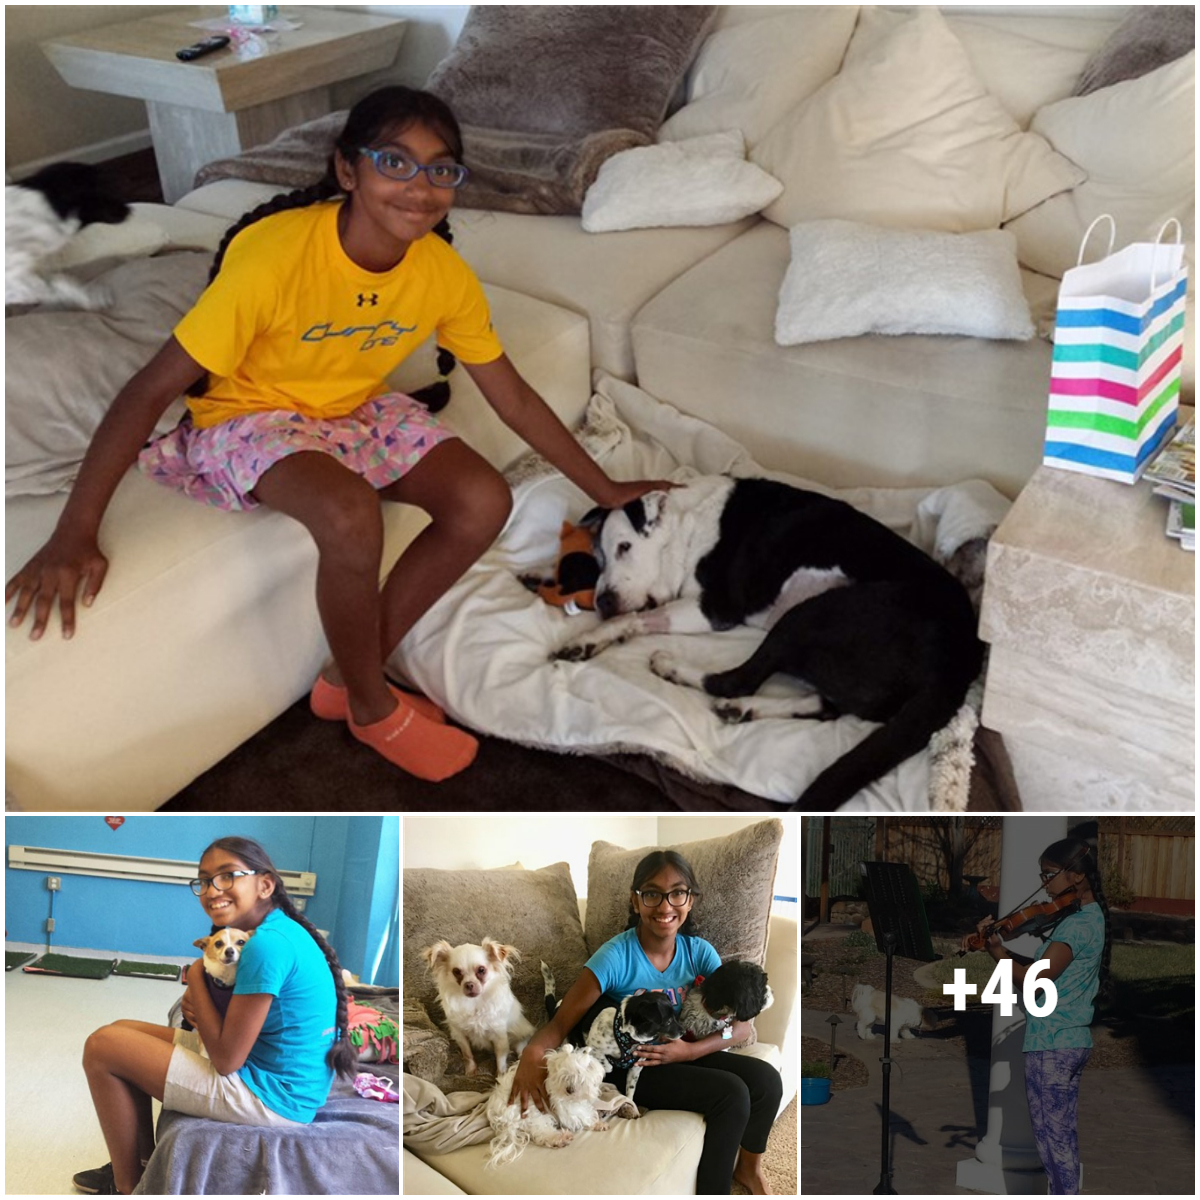 An orphan girl was kindly adopted to help poor dogs in similar situations find forever loving homes.